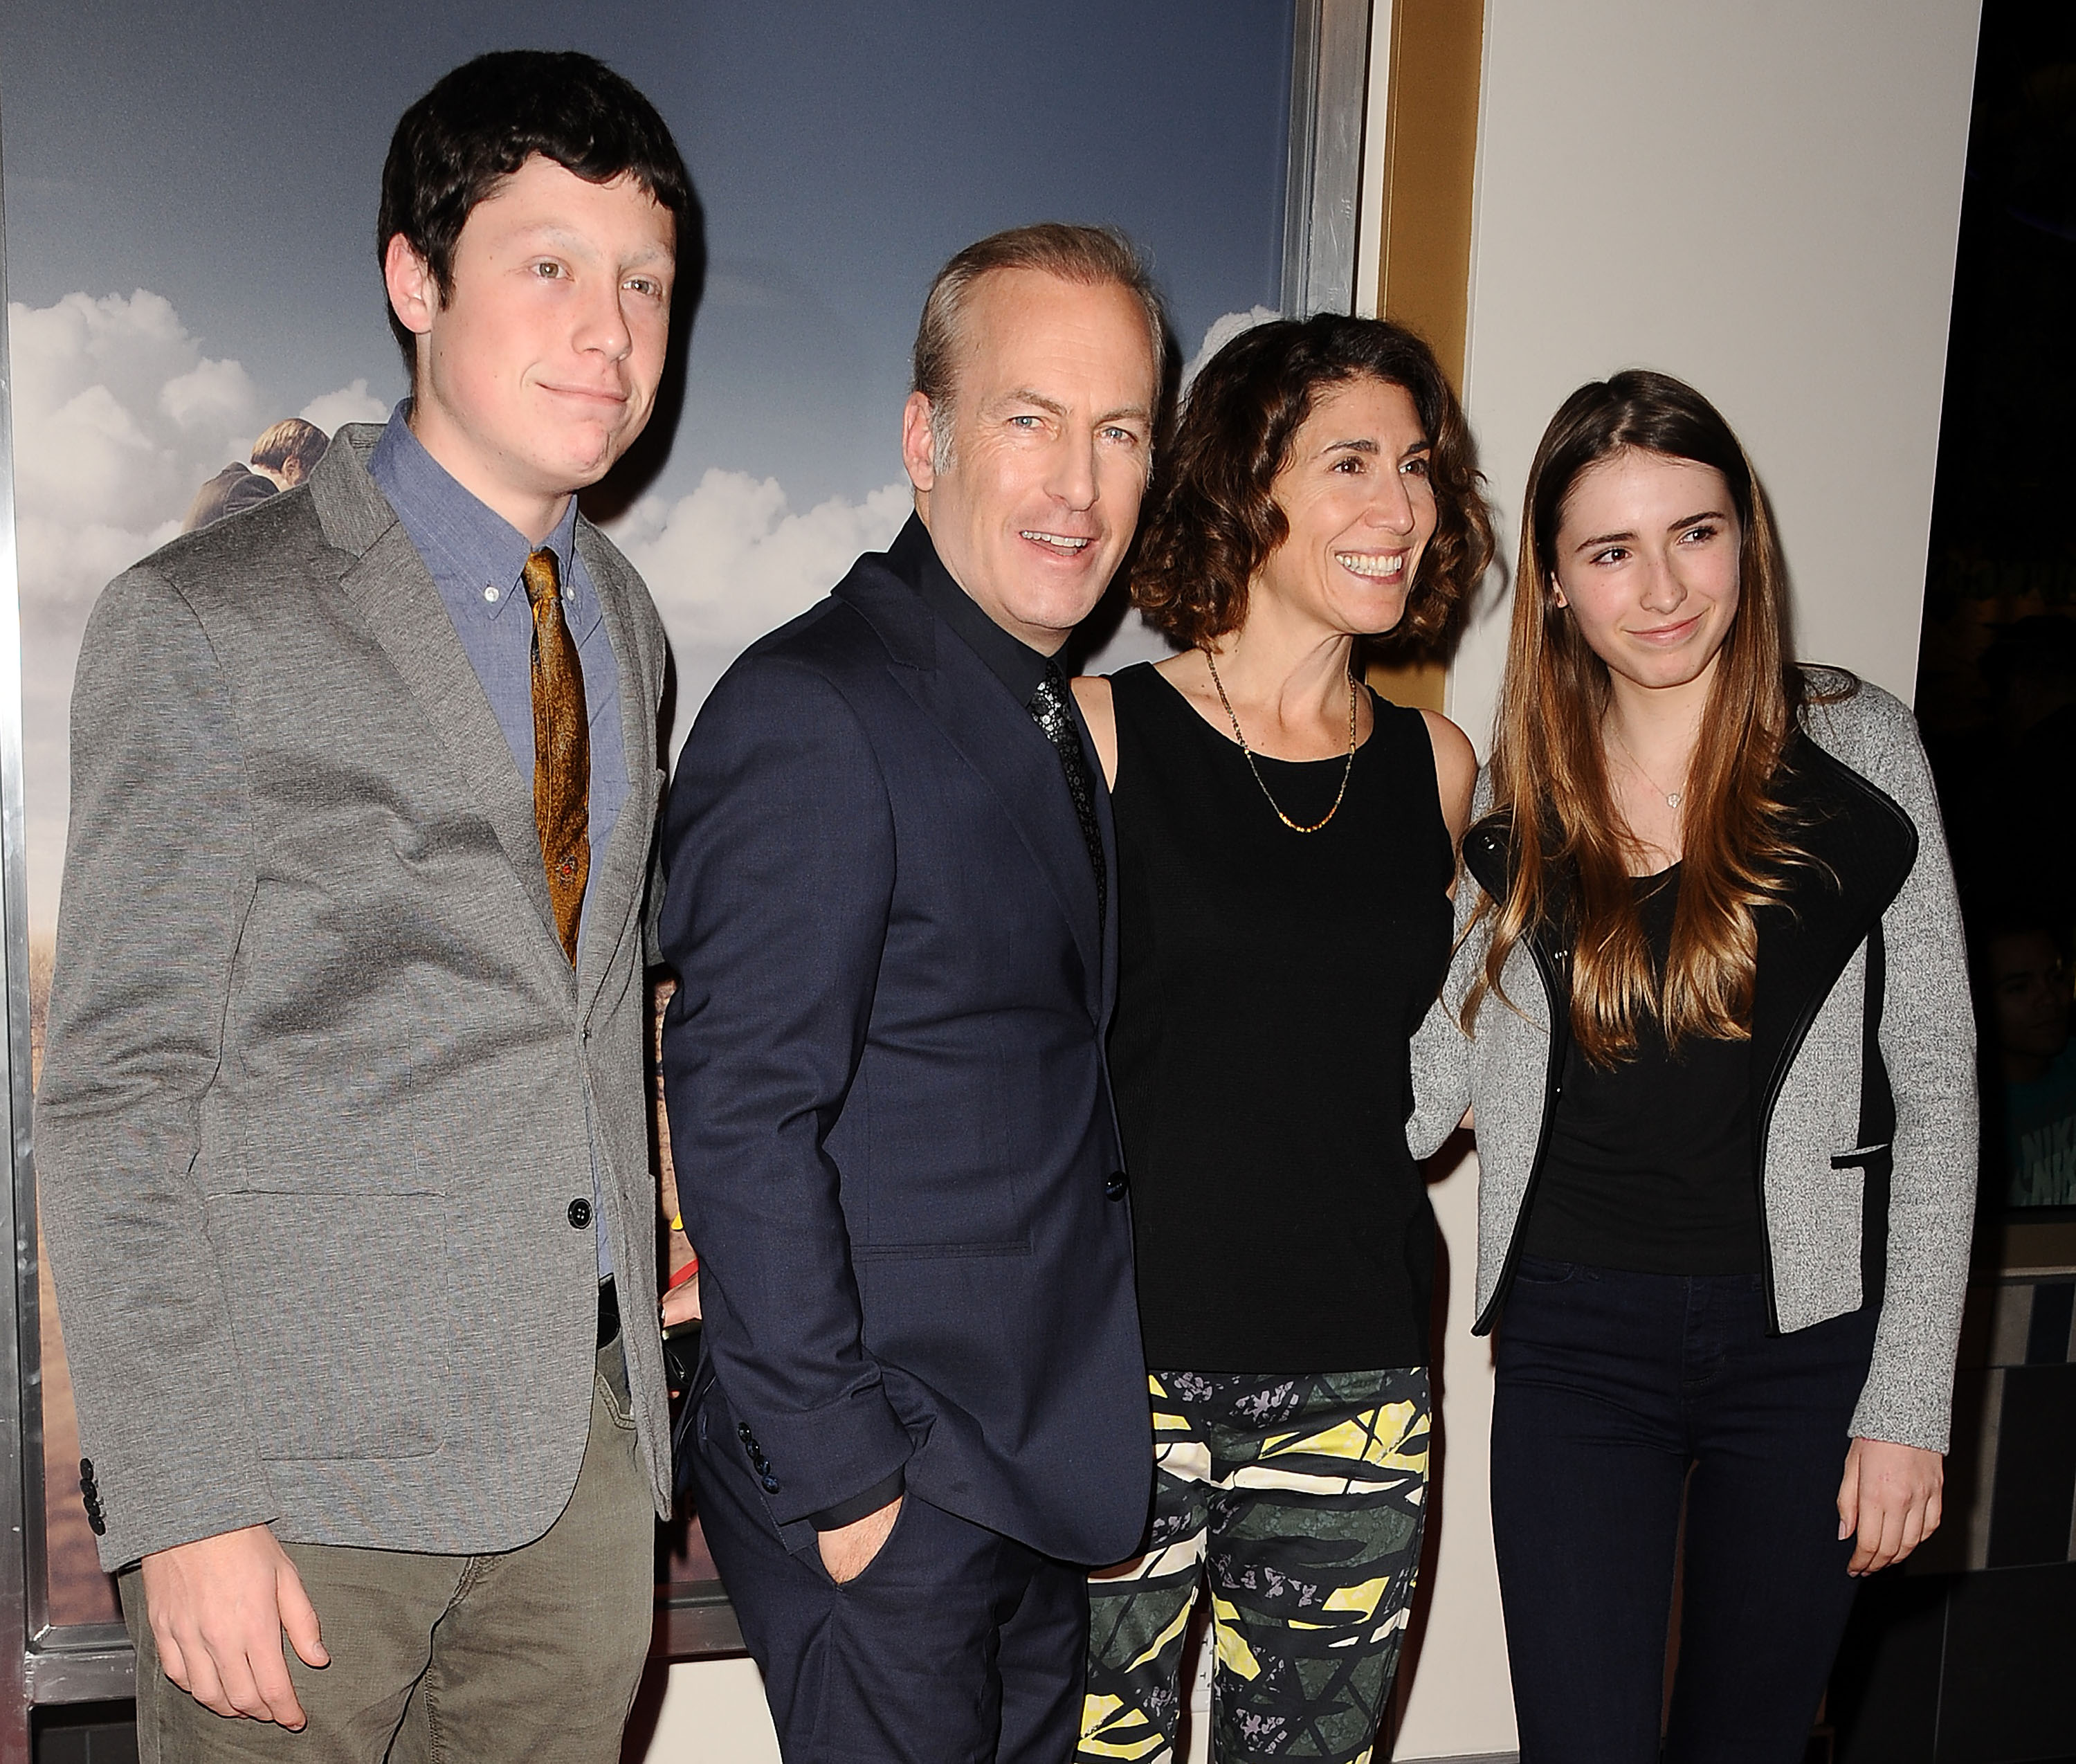 Nate Odenkirk, Bob Odenkirk, Naomi Yomtov, and Erin Odenkirk in Los Angeles, California, on January 29, 2015. | Source: Getty Images